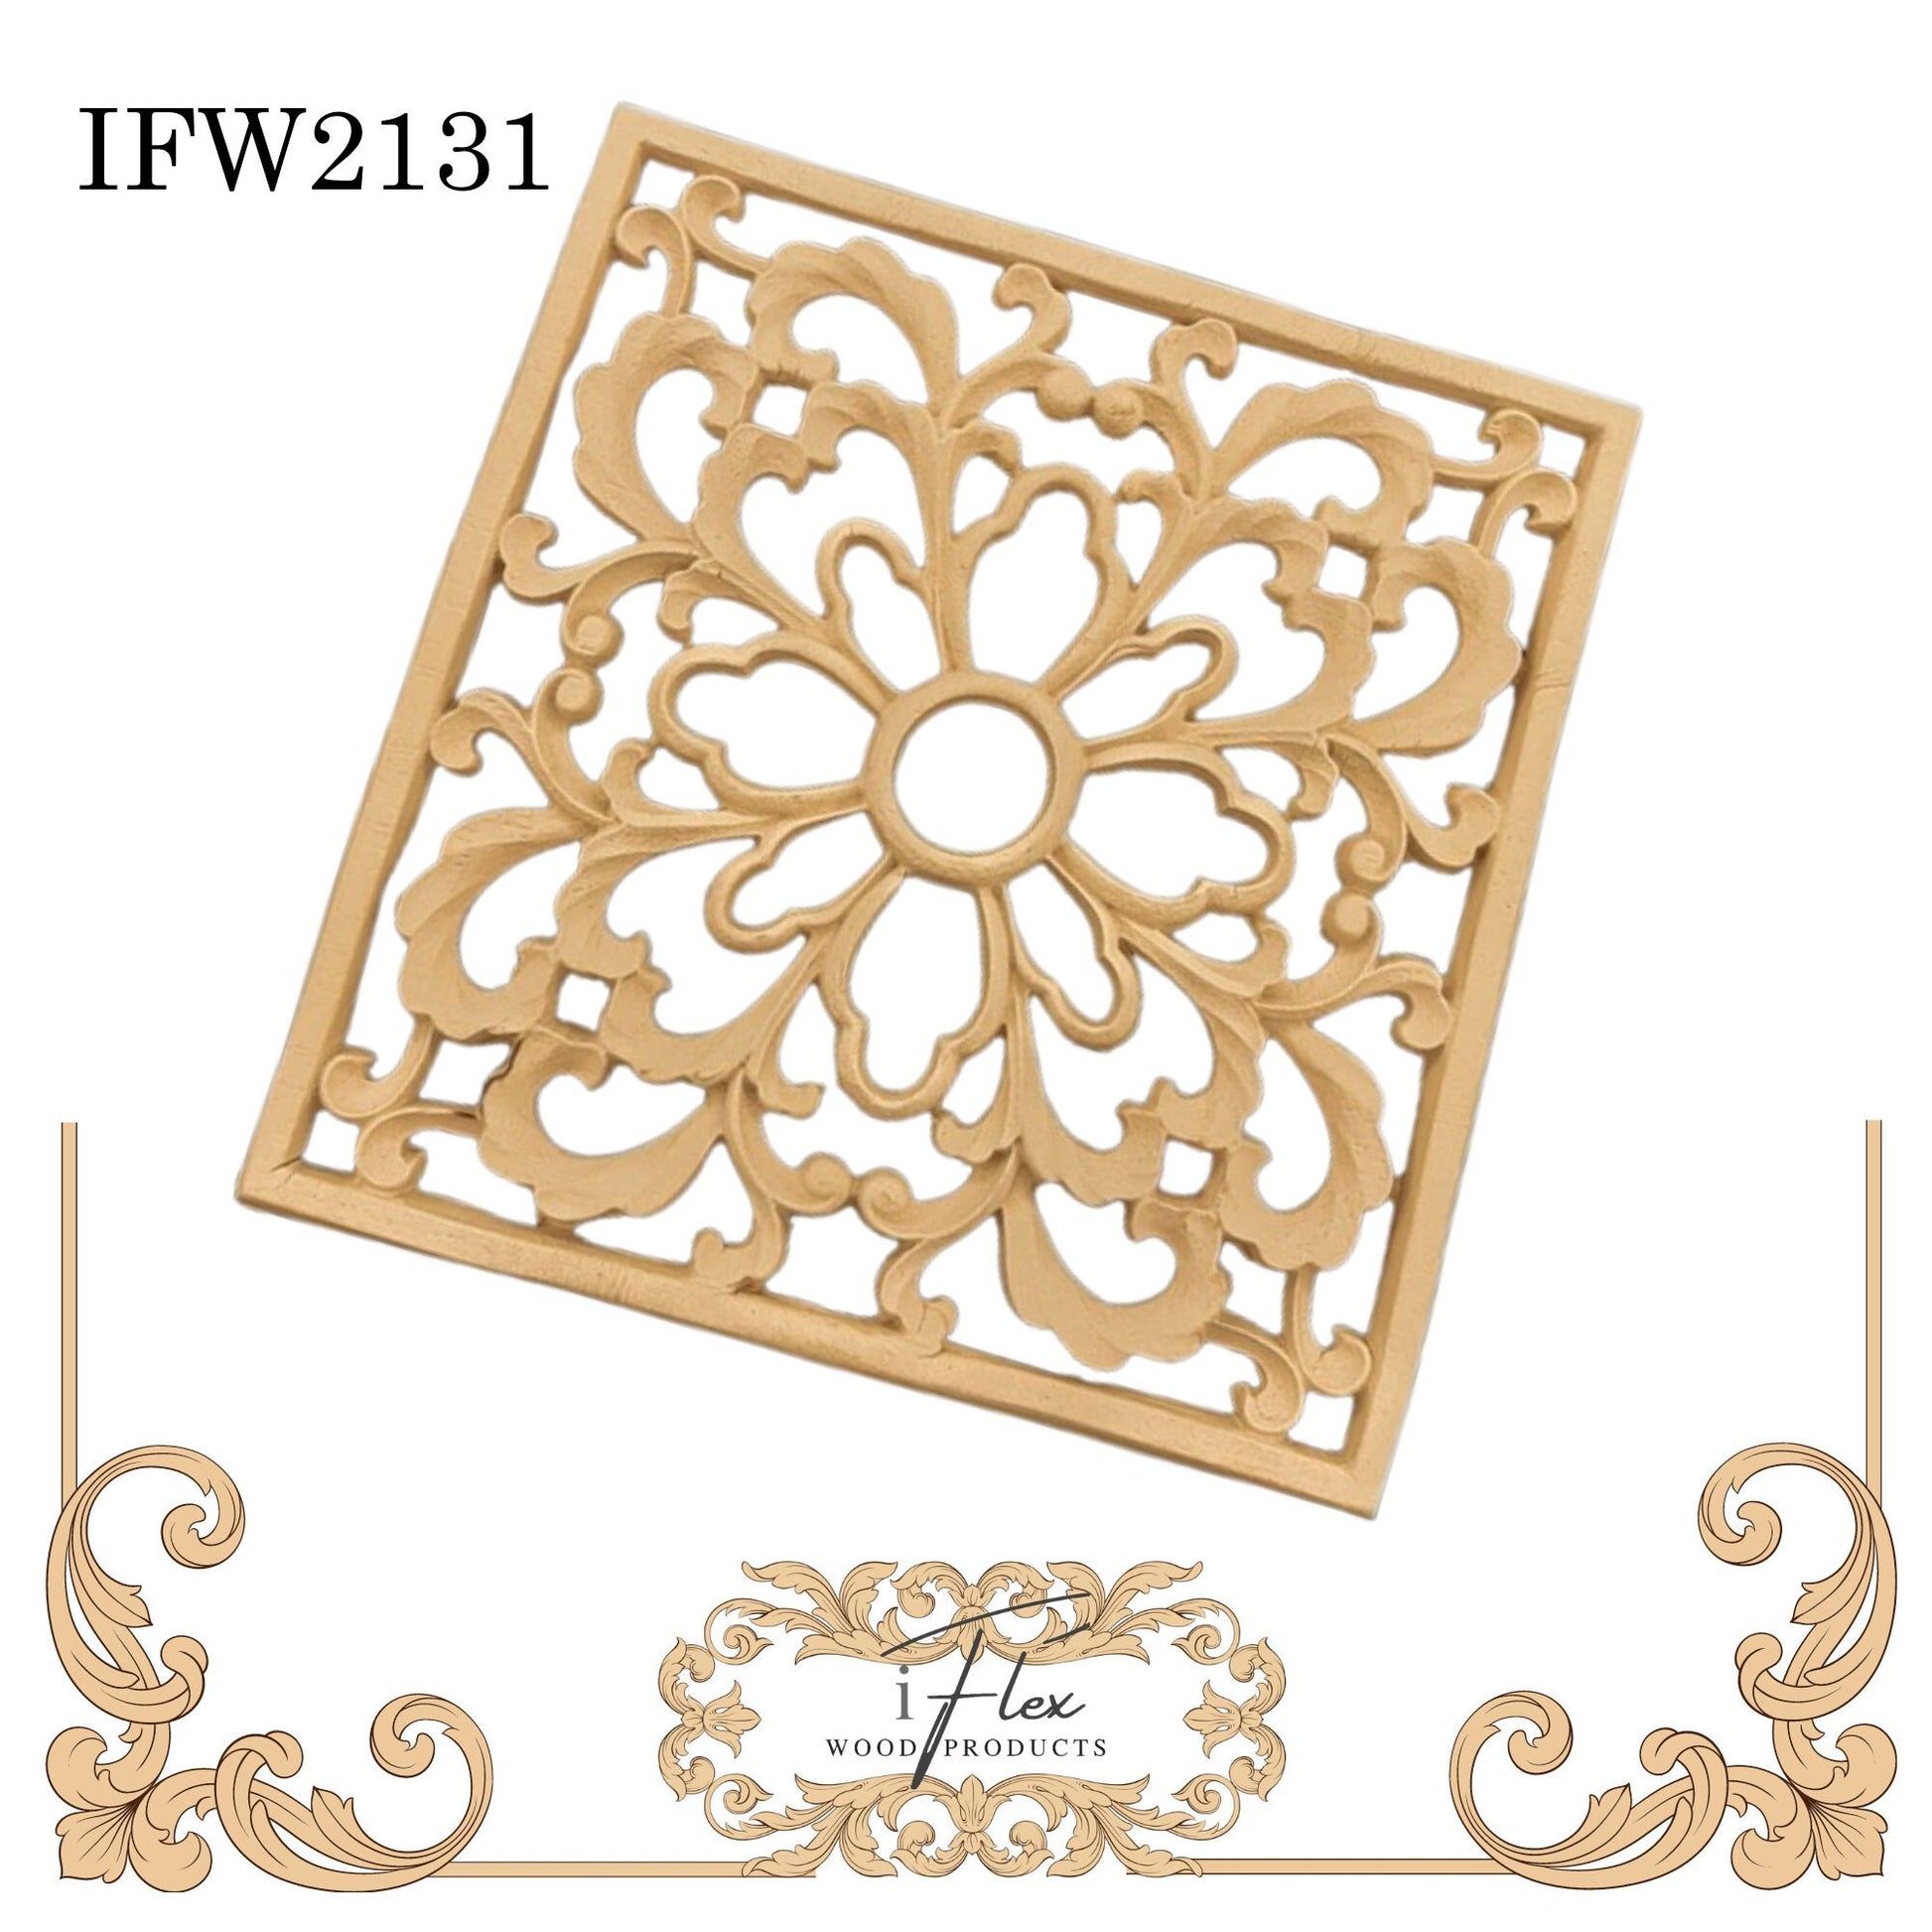 IFW 2131 iFlex Wood Products, bendable mouldings, flexible, wooden appliques, centerpiece